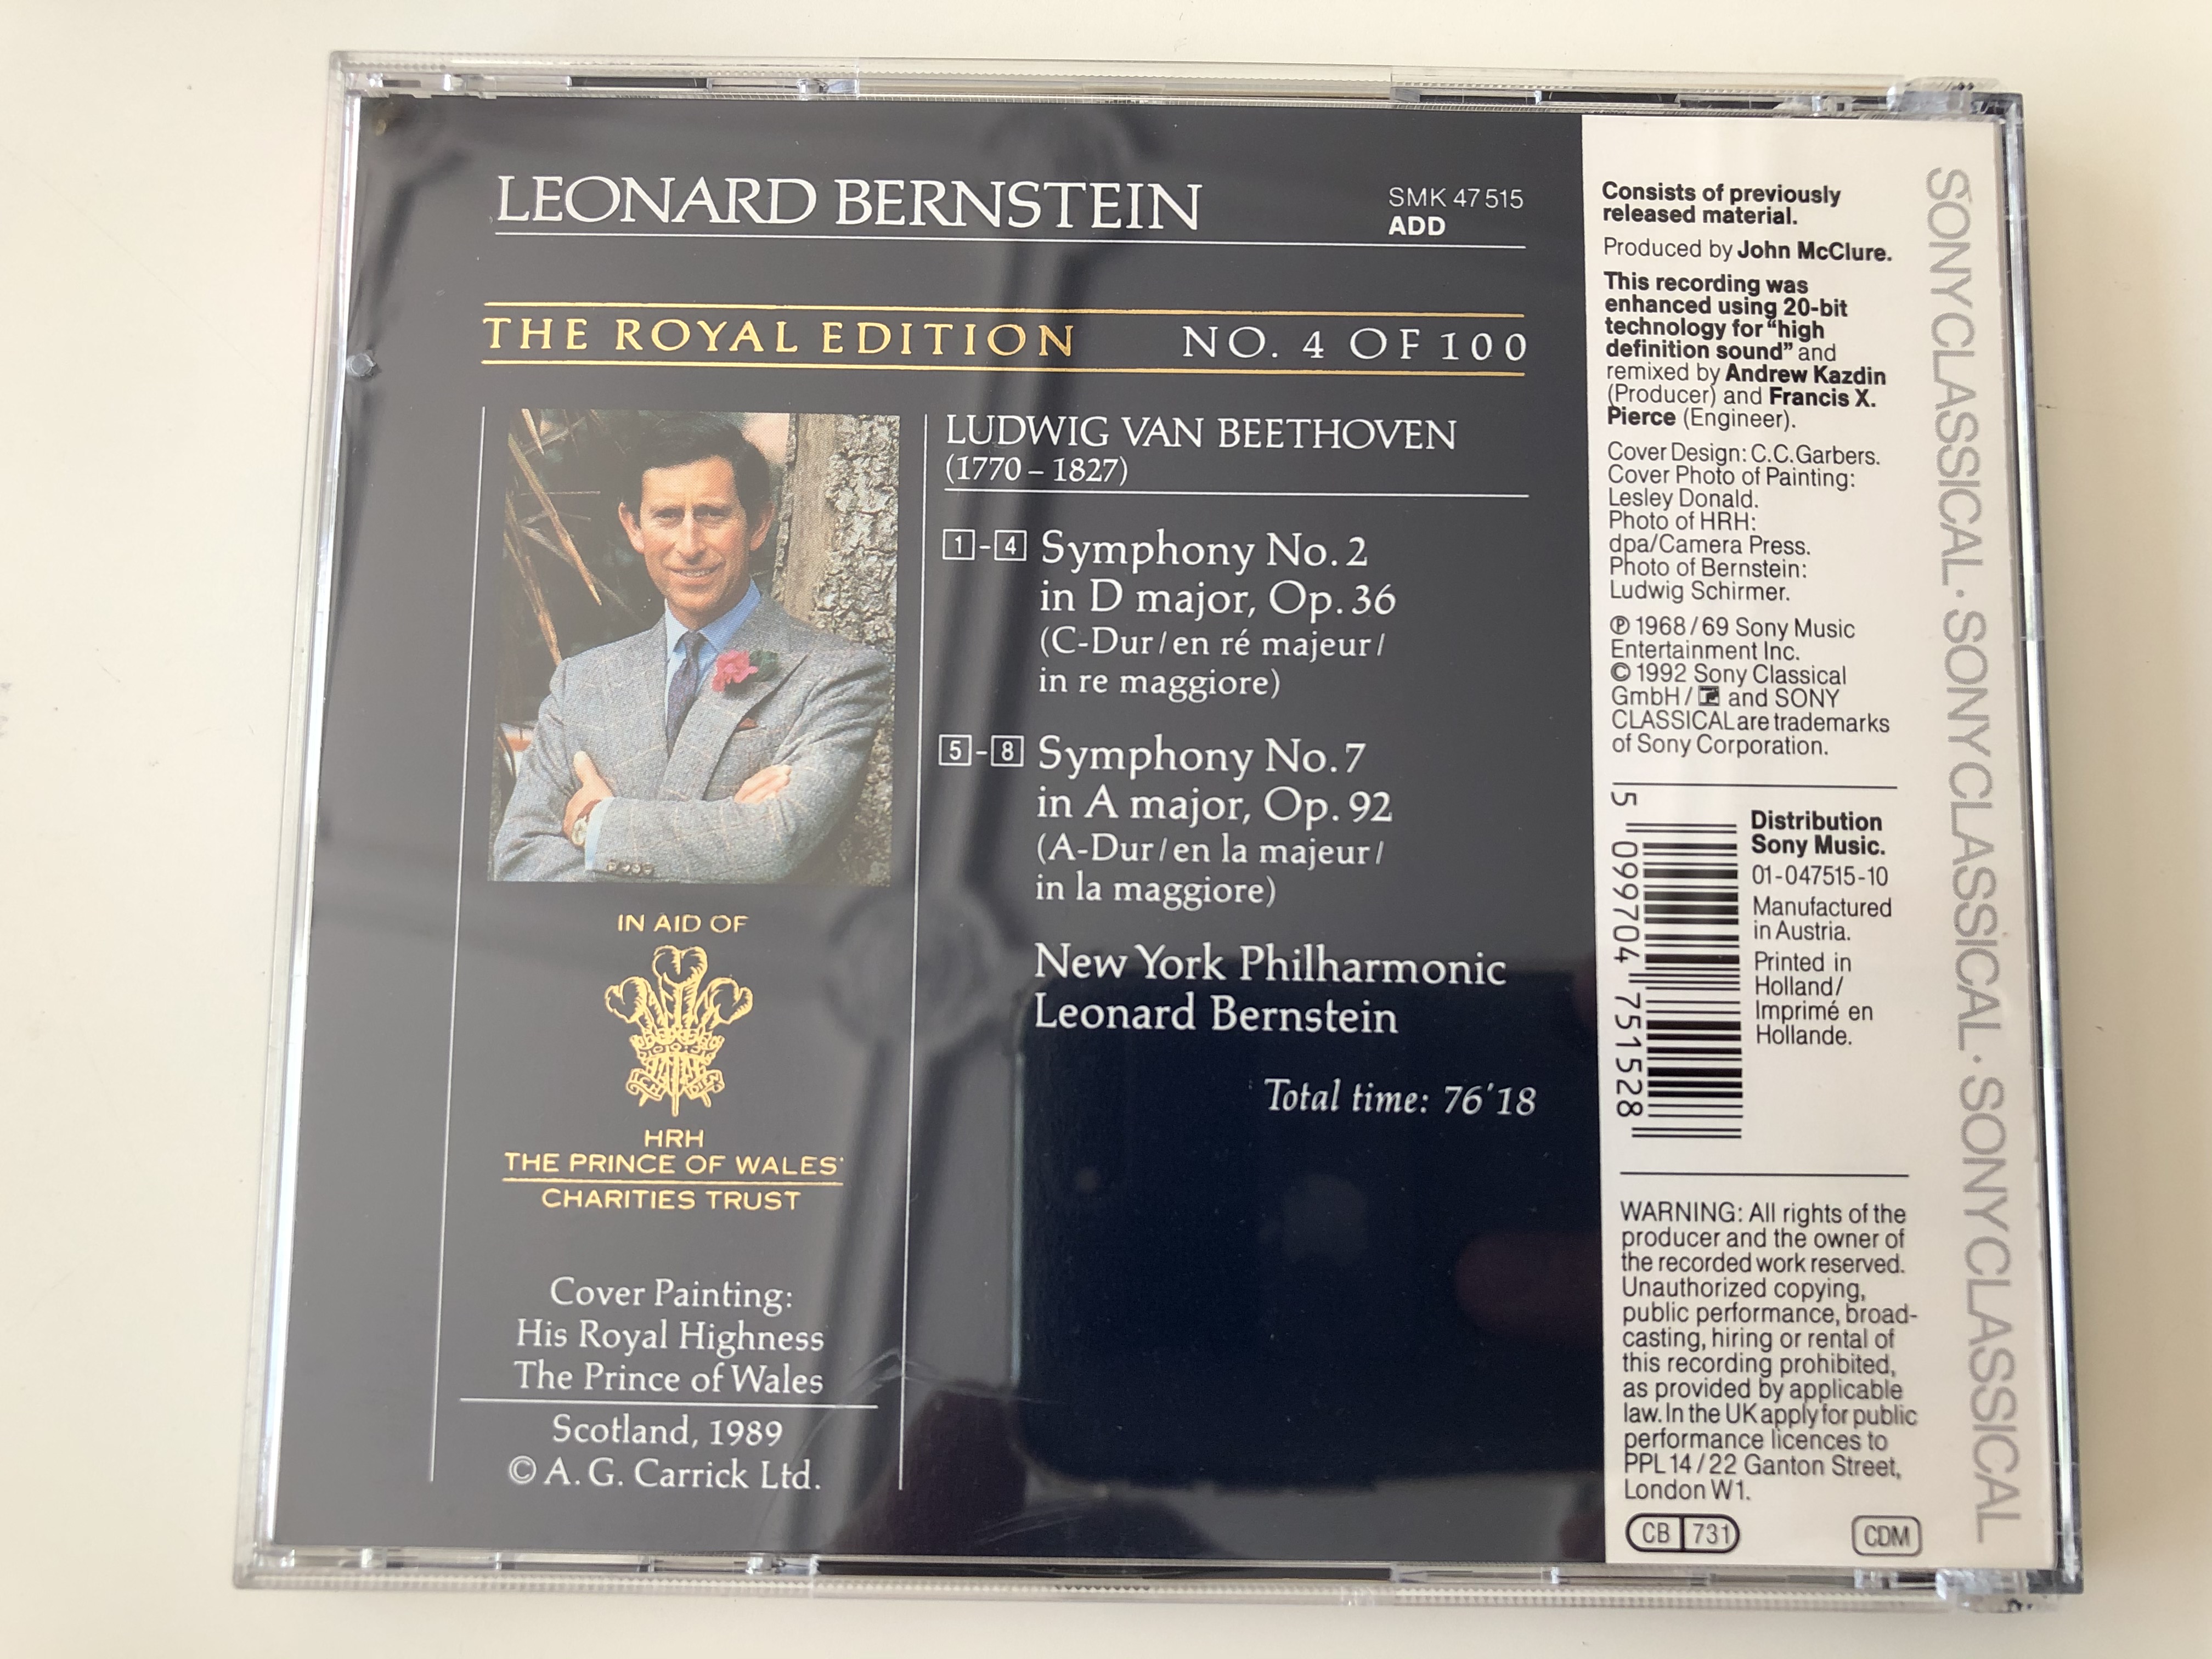 leonard-bernstein-beethoven-symphonies-no.-2-no.-7-new-york-philharmonic-the-royal-edition-painting-by-h.-r.-h.-the-prince-of-wales-no.-4-of-100-sony-classical-audio-cd-1992-smk-475-7-.jpg